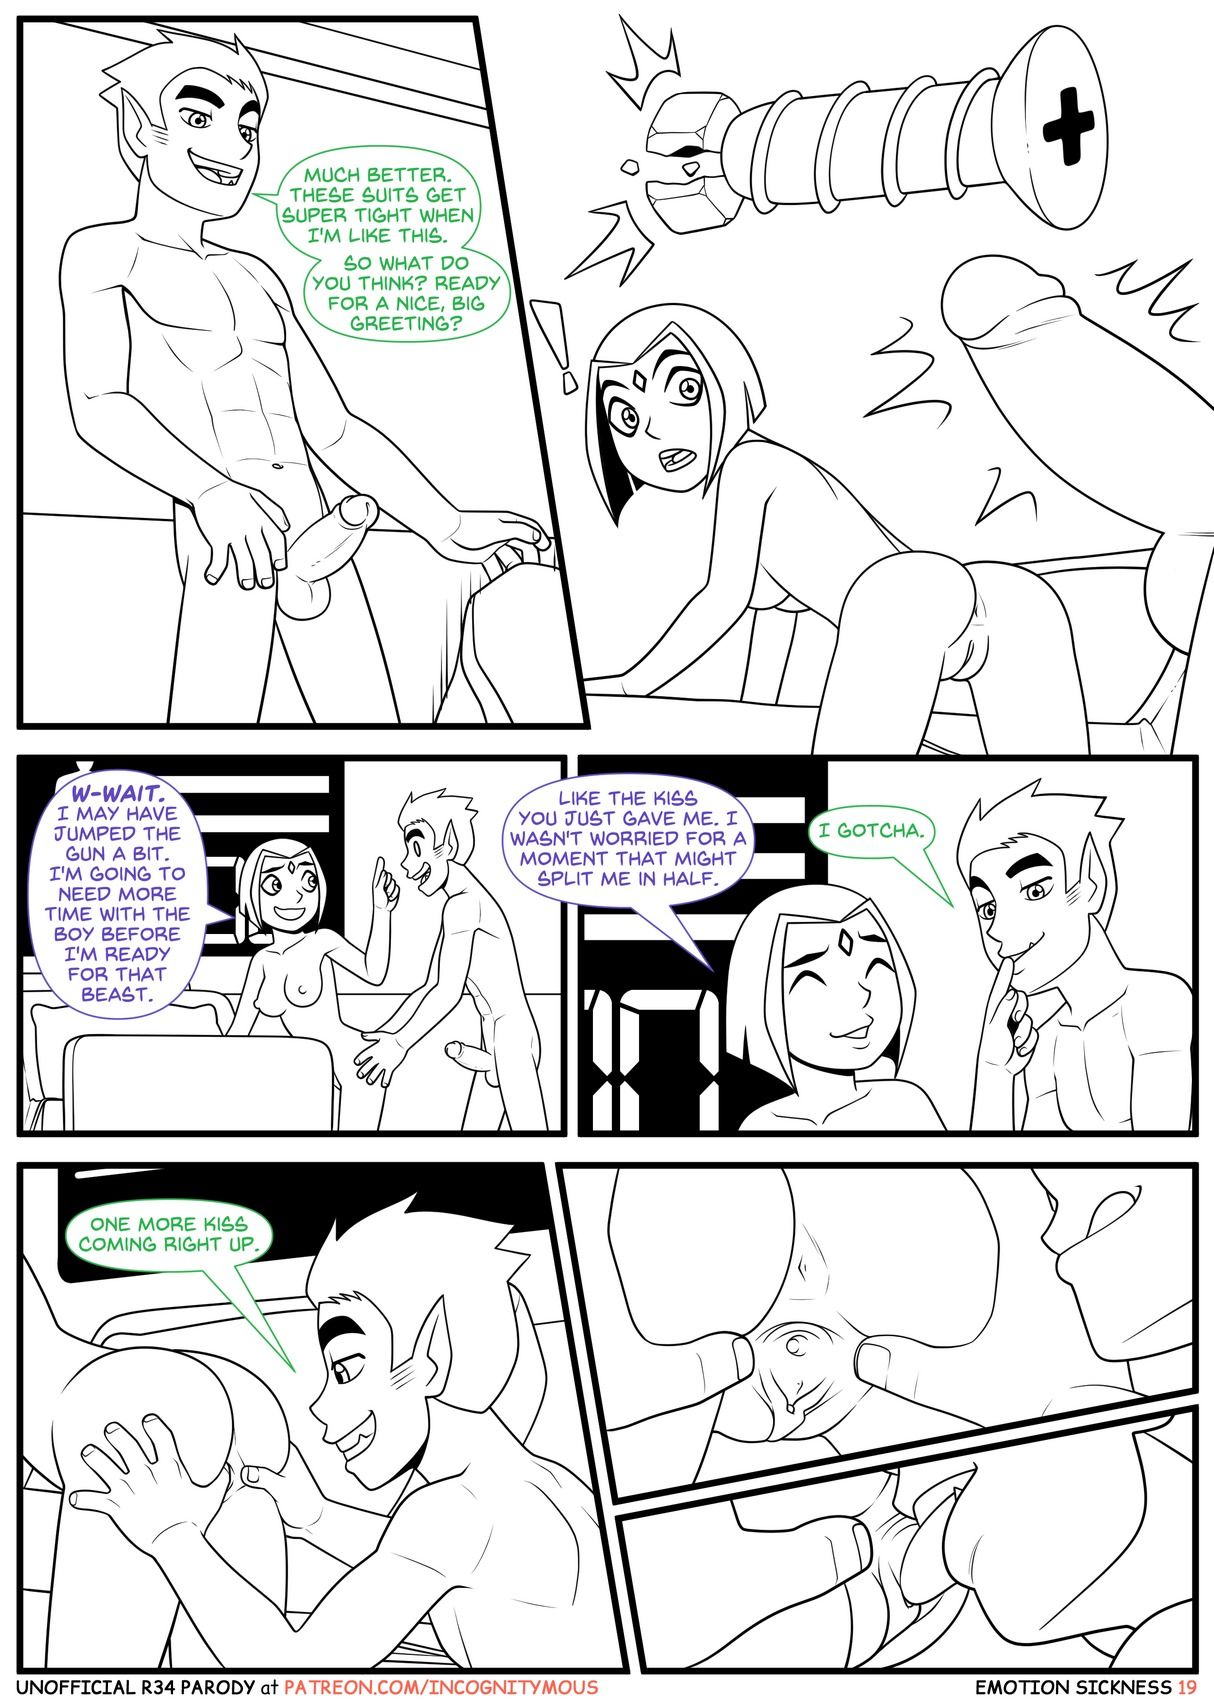 Teen Titans - Emotion Sickness (Incognitymous) page 38